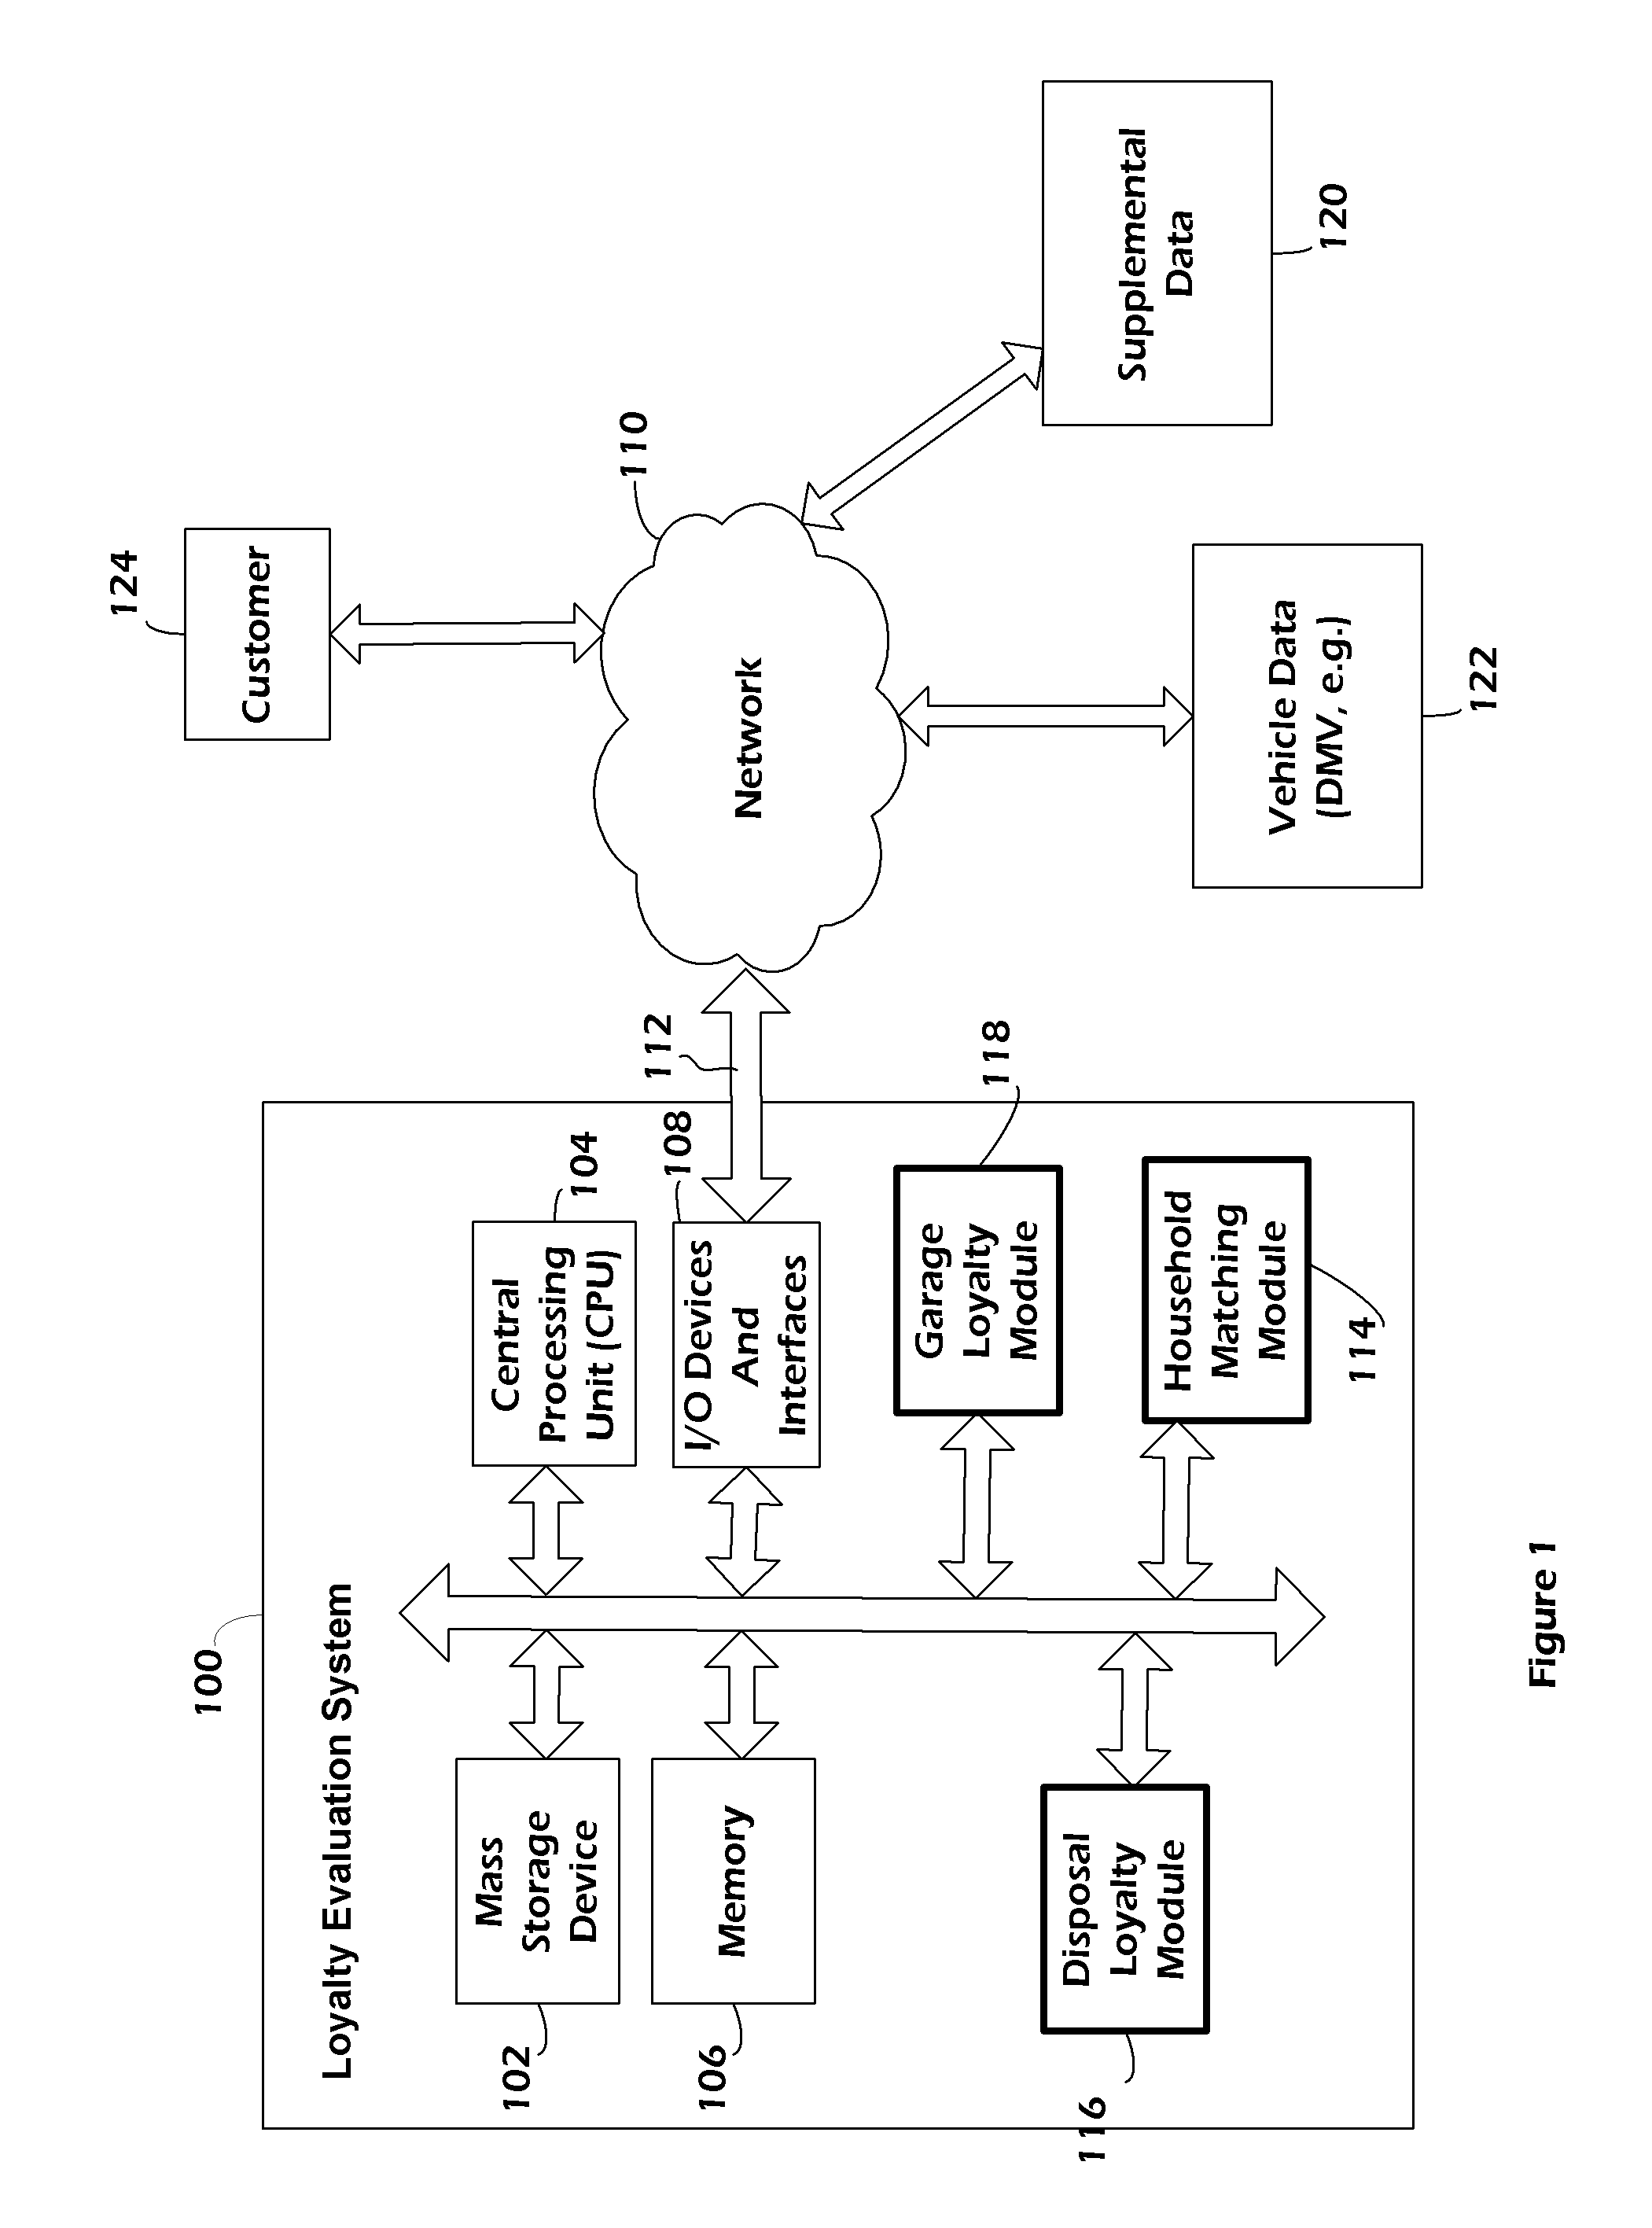 System and method for evaluating vehicle purchase loyalty